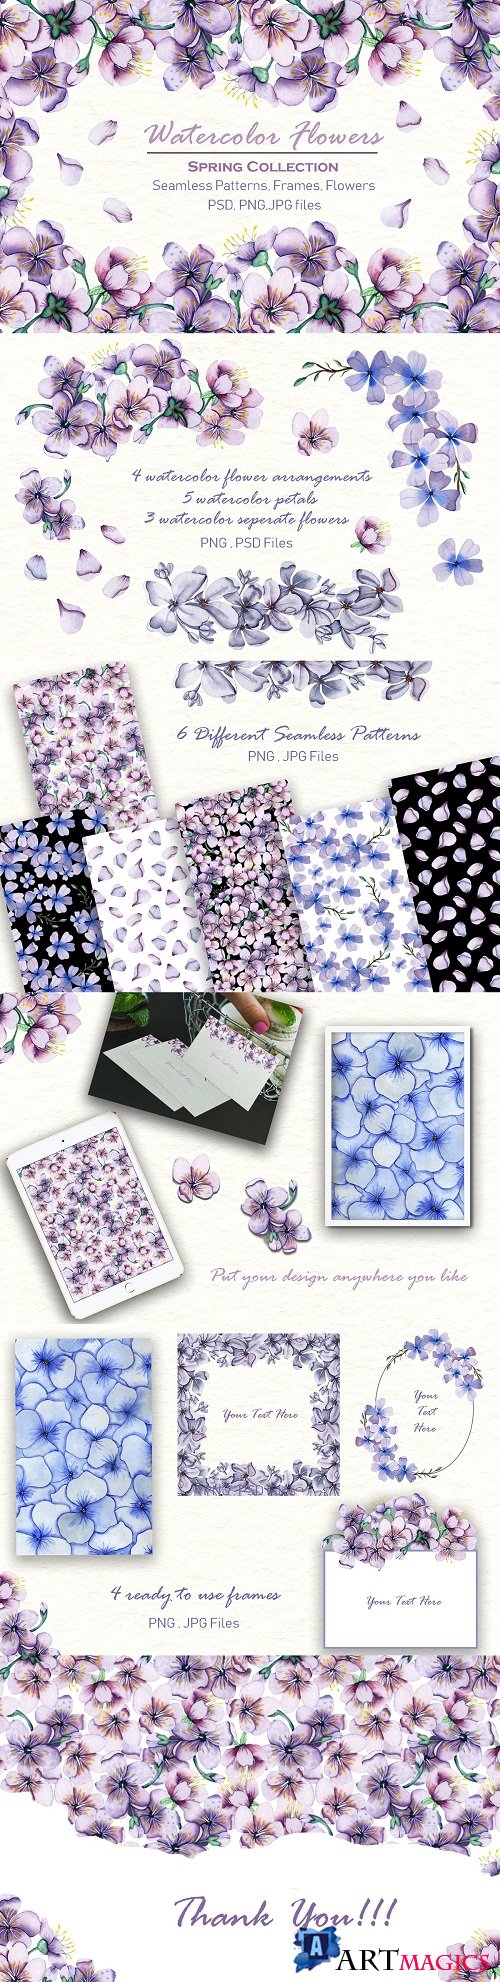 Watercolor Flowers Spring Collection - 3534155